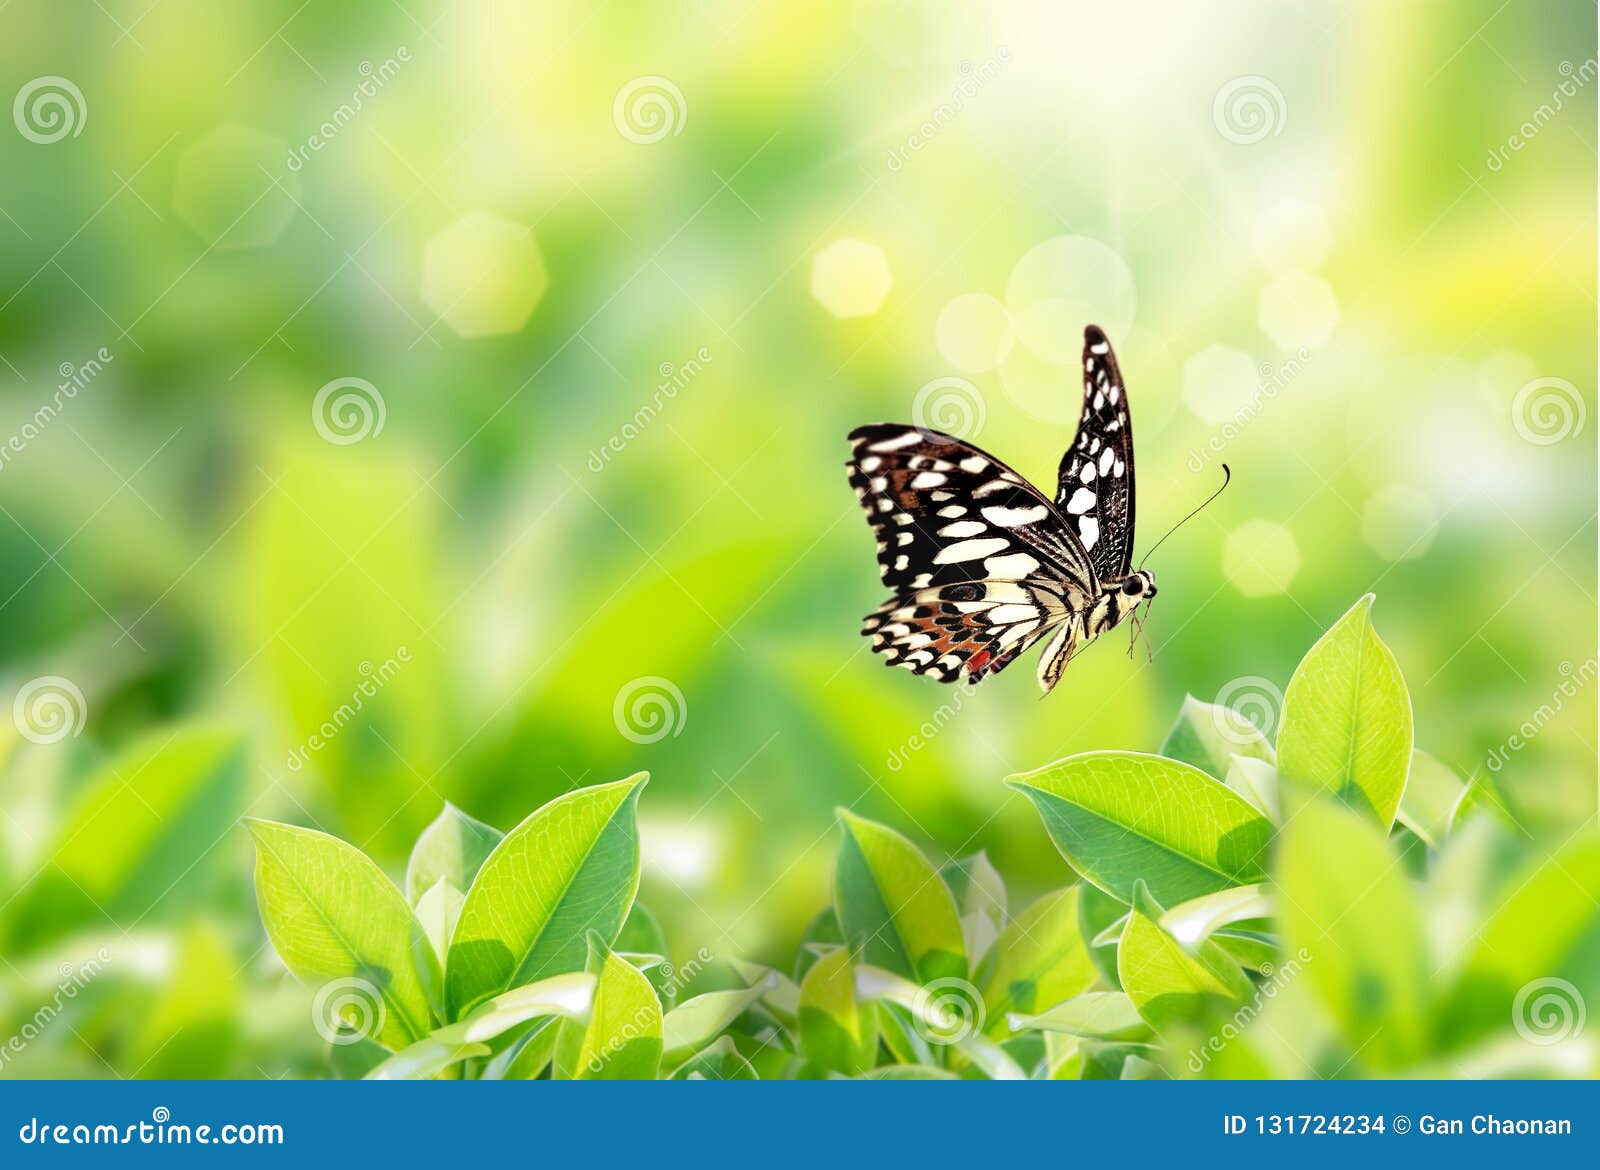 Closeup Nature View of Butterfly with Green Leaf on Blurred Greenery  Background in Garden with Copy Space Using As Background Stock Photo -  Image of environment, ecology: 131724234